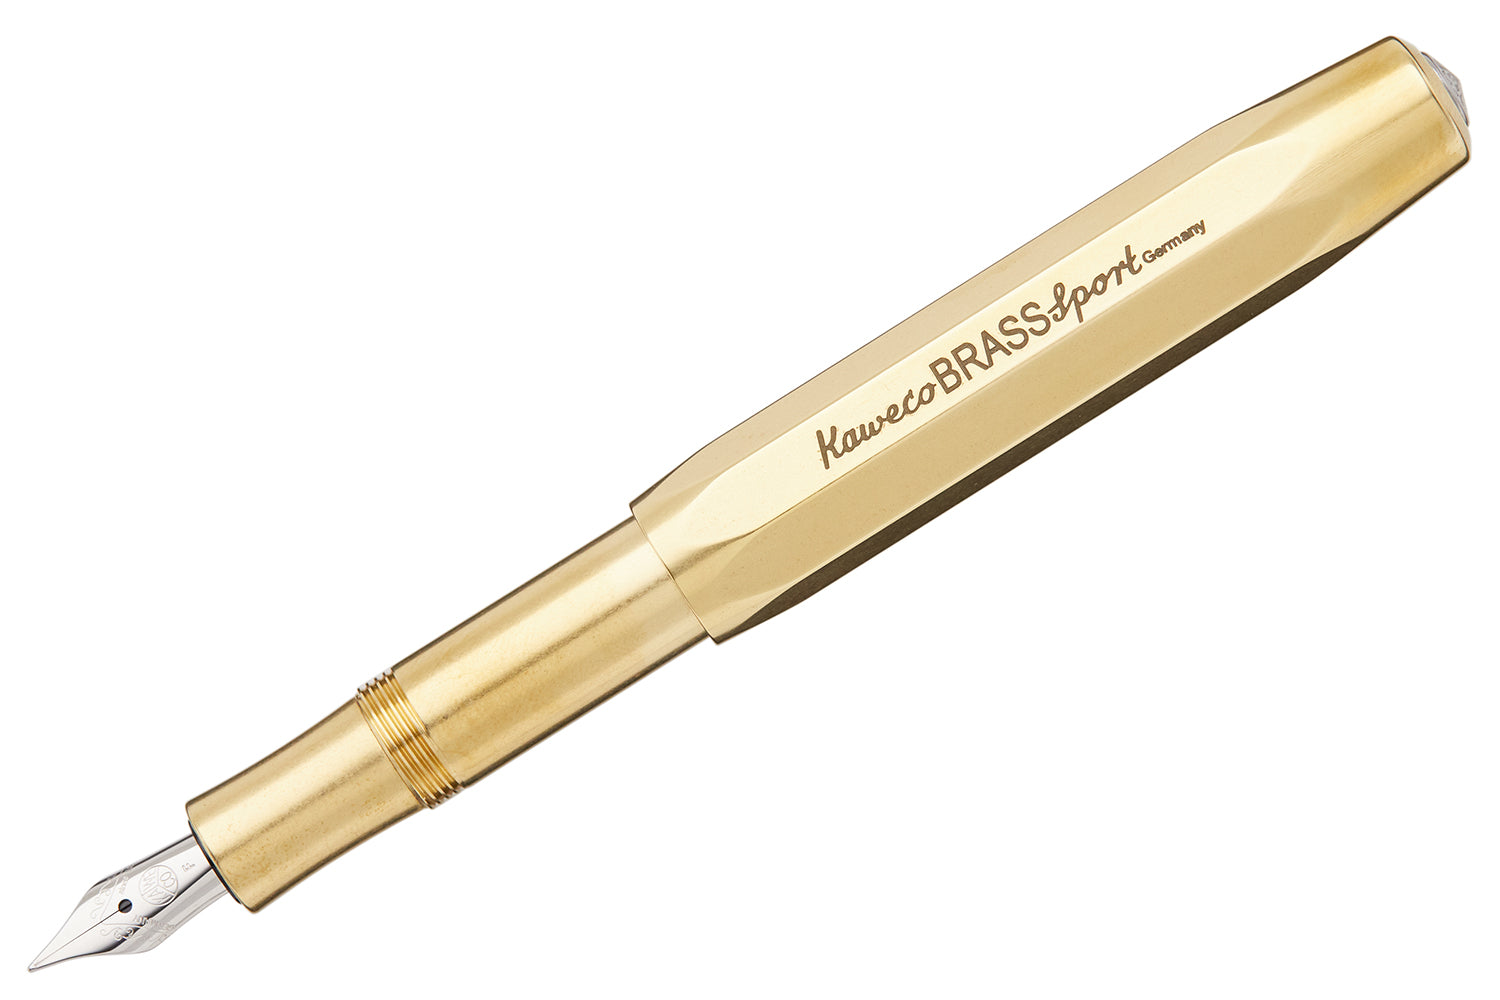  Kaweco BRASS SPORT Fountain Pen I Exclusive Brass Fountain Pen  for Ink Cartridges Including Retro Metal Box I Fountain Pen 13 cm I Nib: F  (Fine) : Office Products